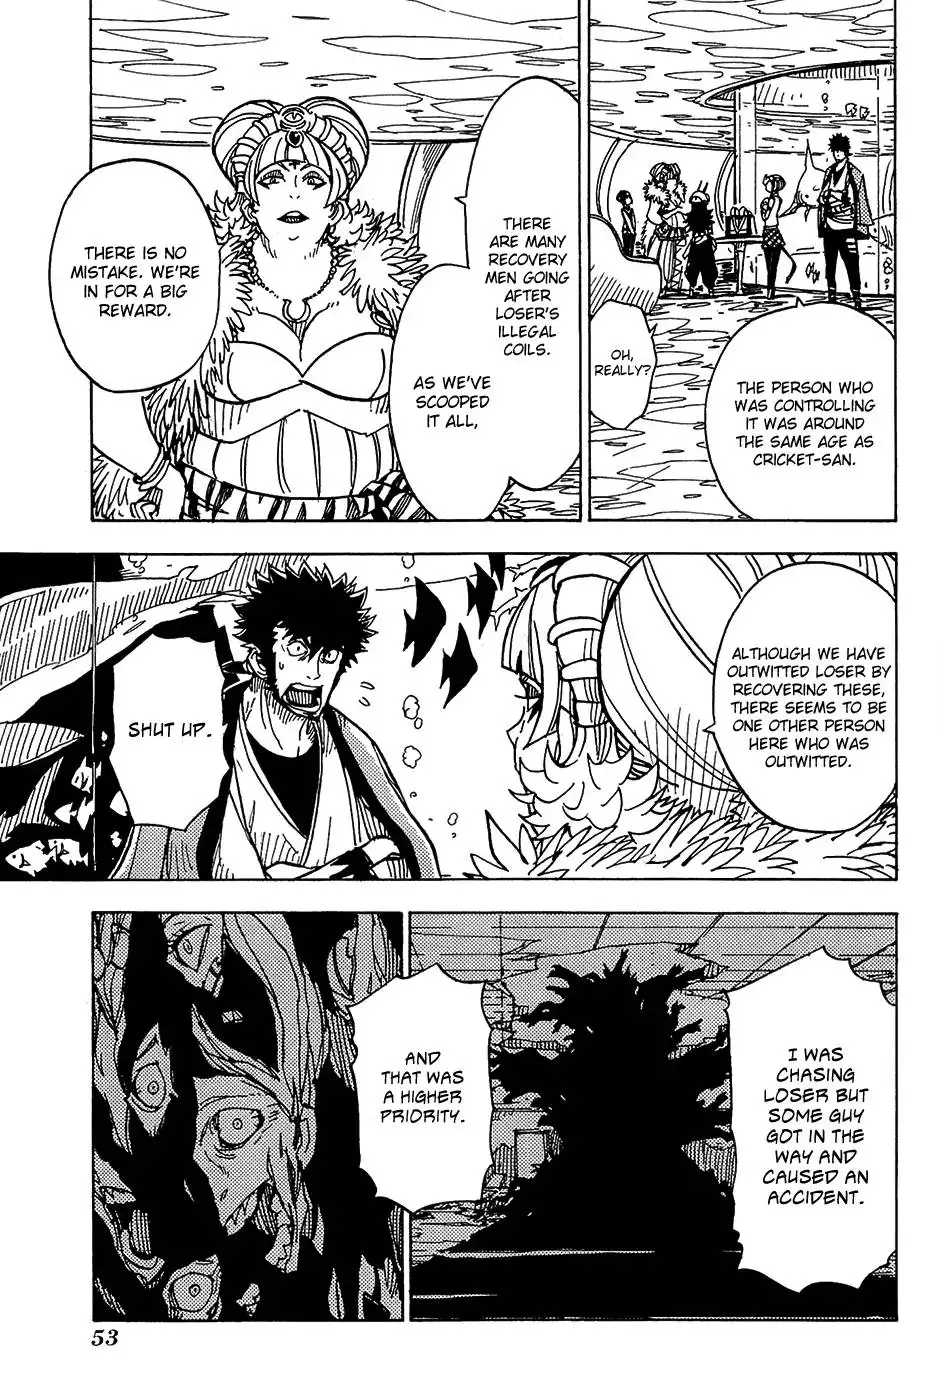 Dimension W Chapter 10